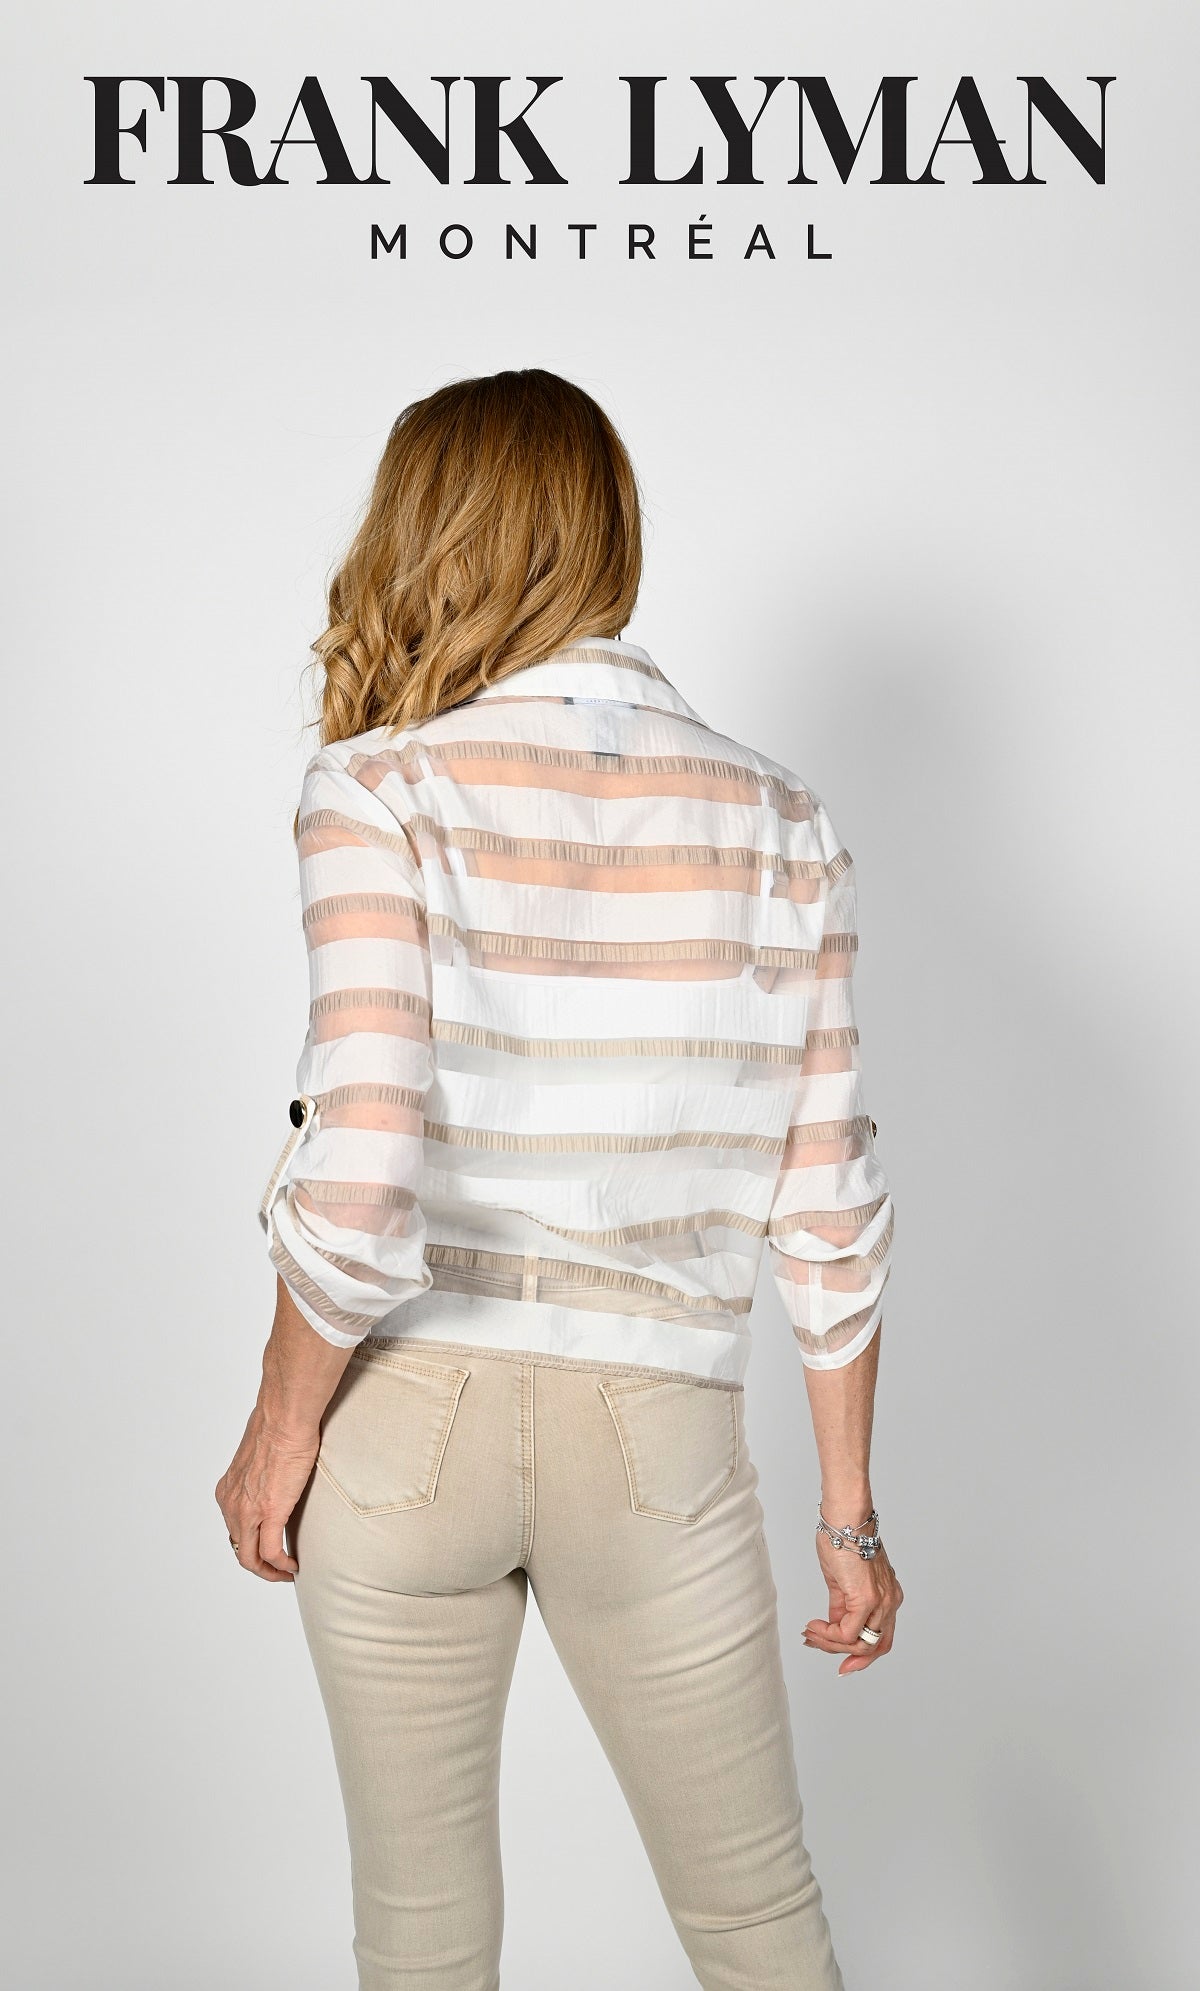 Frank Lyman Montreal Blouses-Buy Frank Lyman Montreal Clothing Online-Frank Lyman Montreal Jeans-Frank Lyman Montreal Beige Blouse-Frank Lyman Montreal Spring 2023 Collection